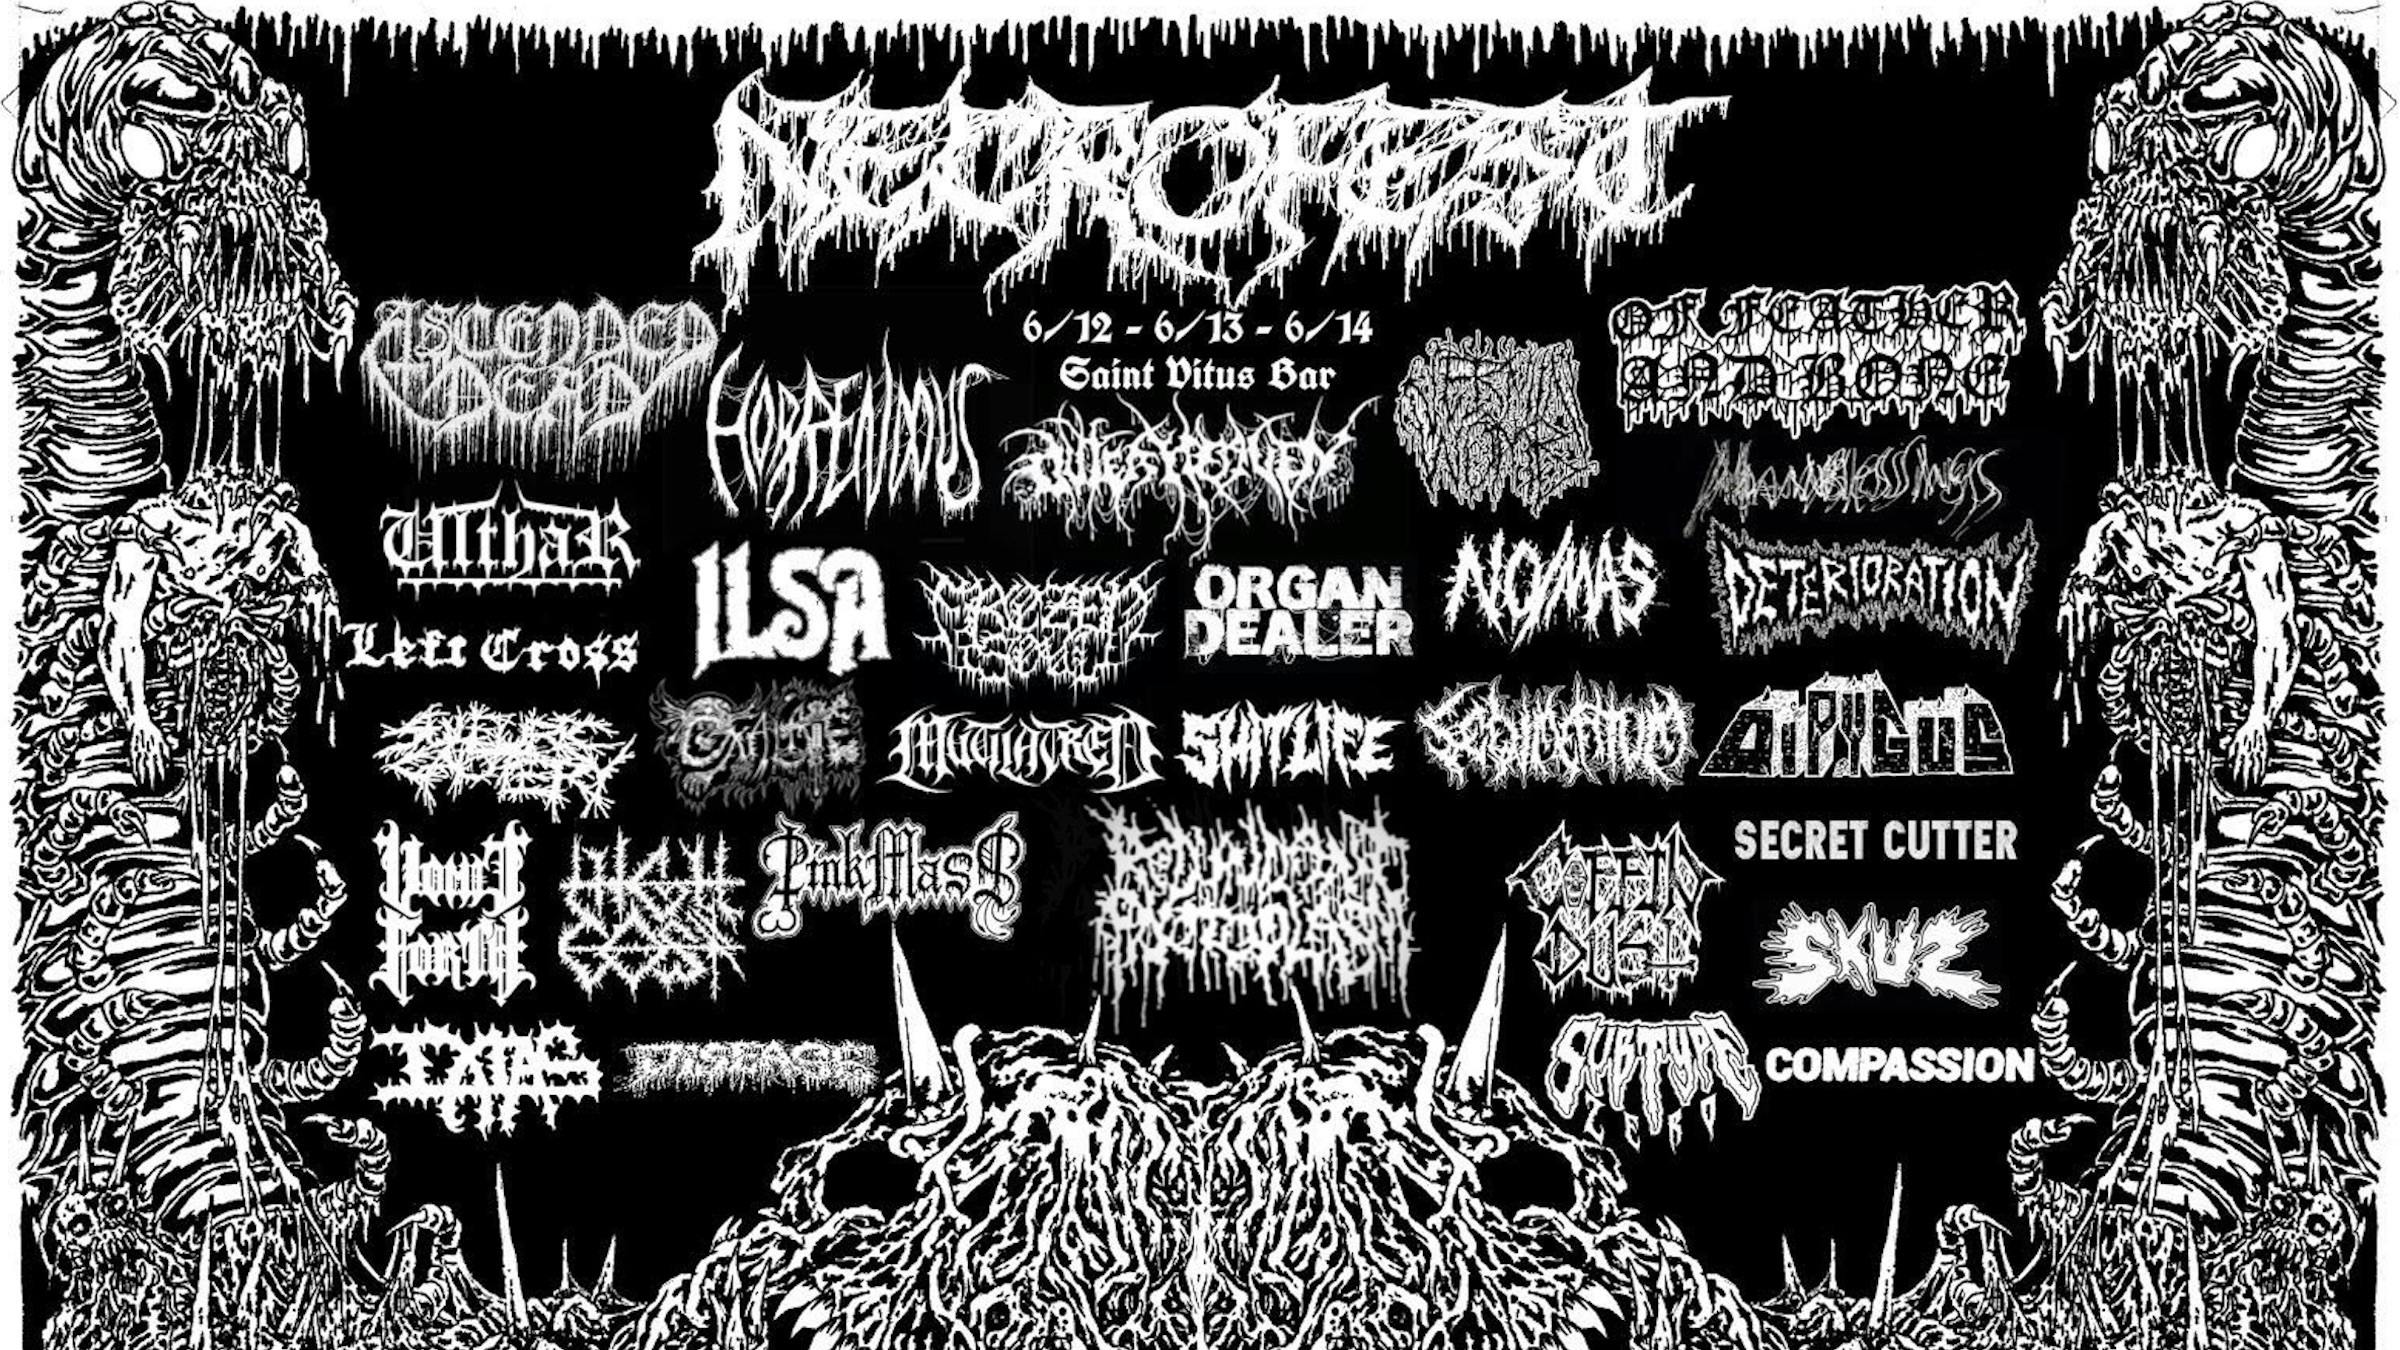 Ilsa, Horrendous, Outer Heaven and More Announced For NYC's Necrofest 2020